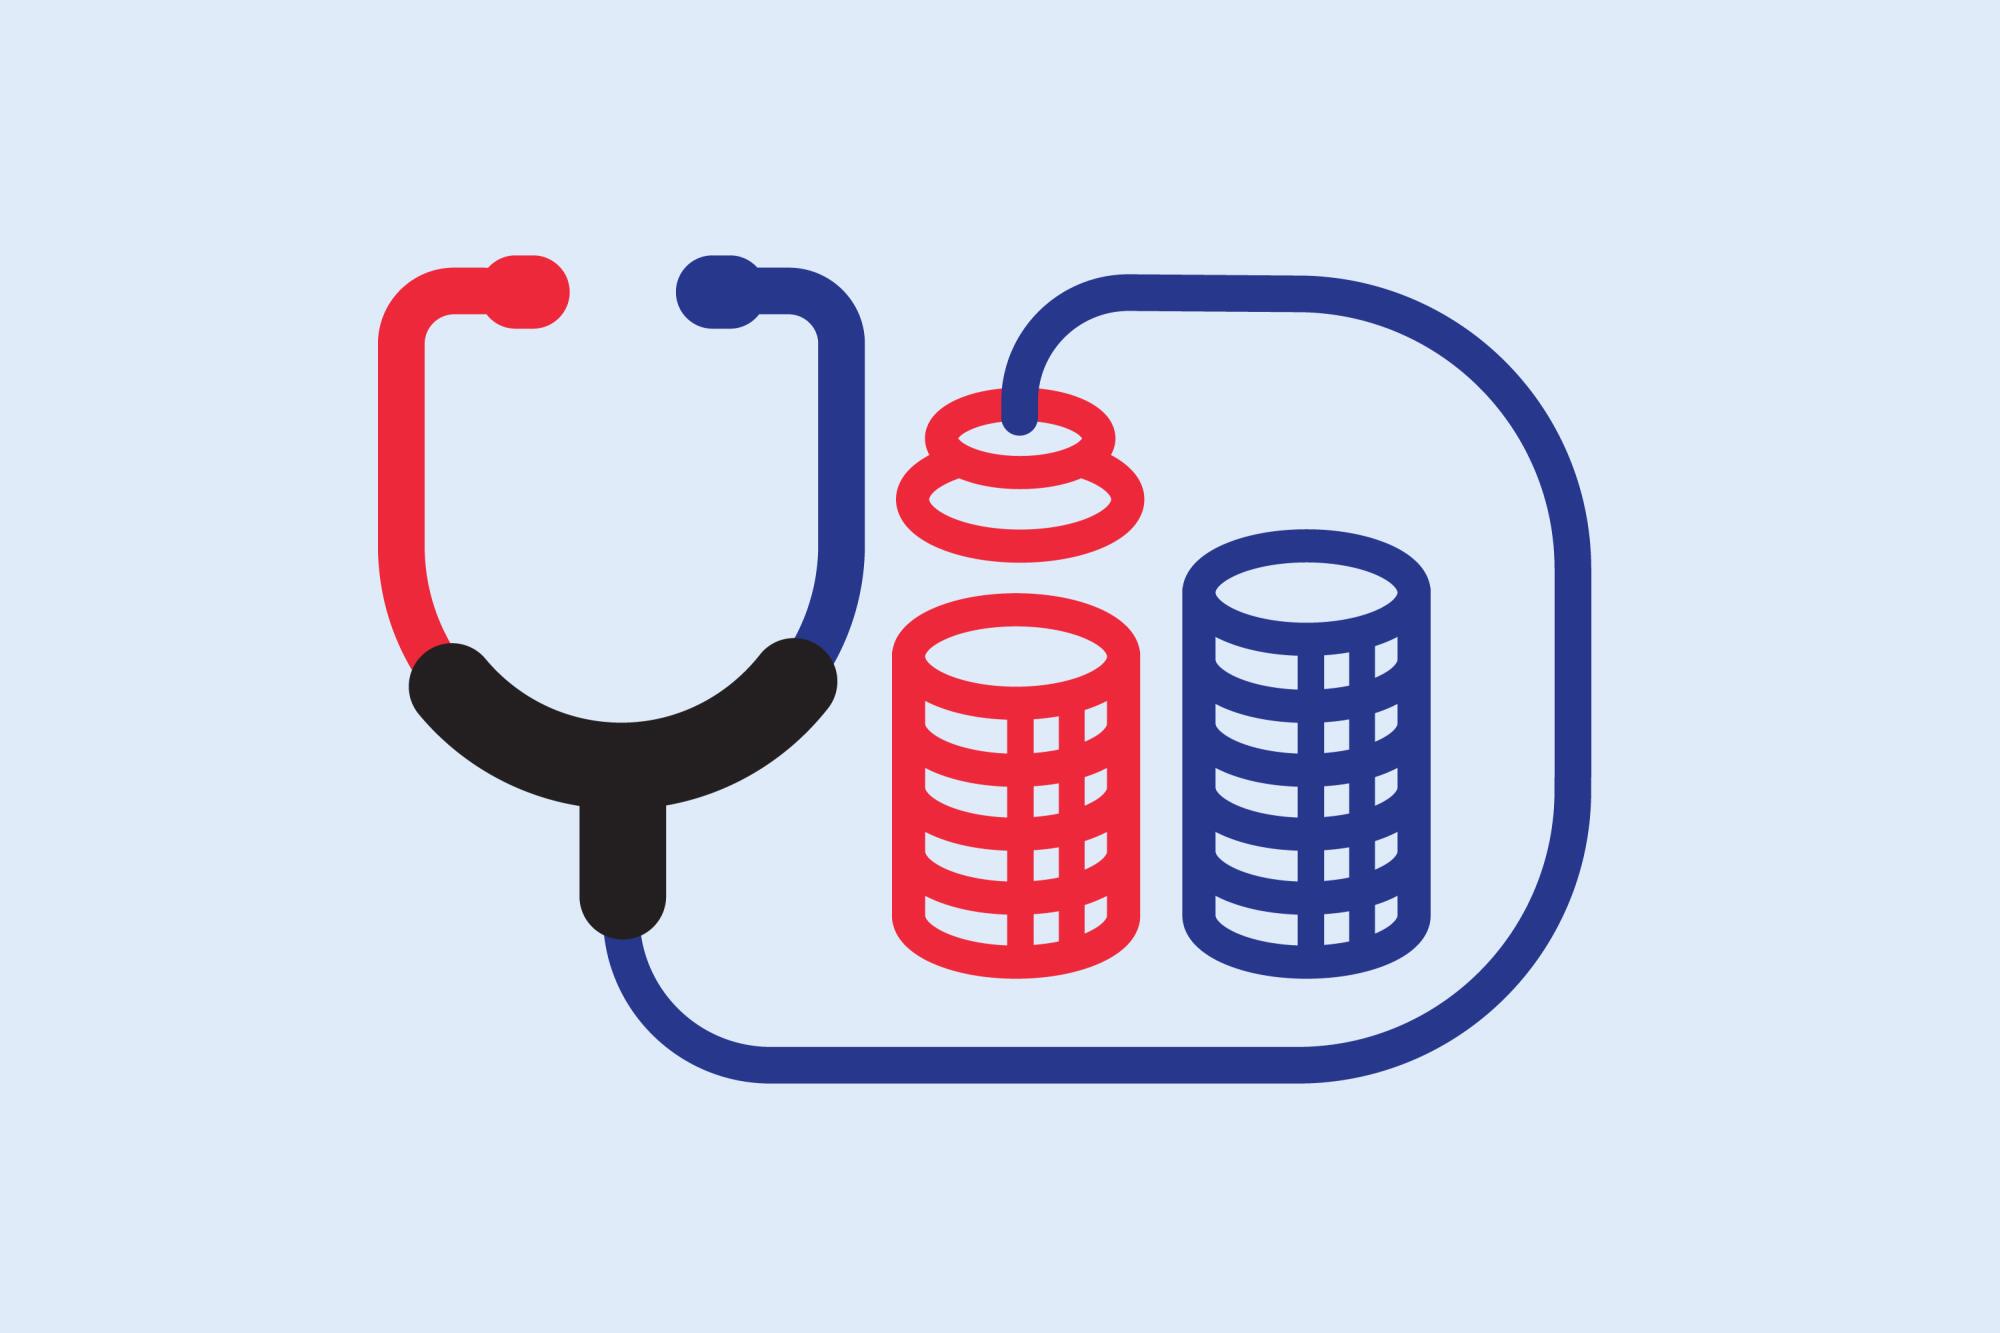 stethoscope in red and blue with stacks of coins